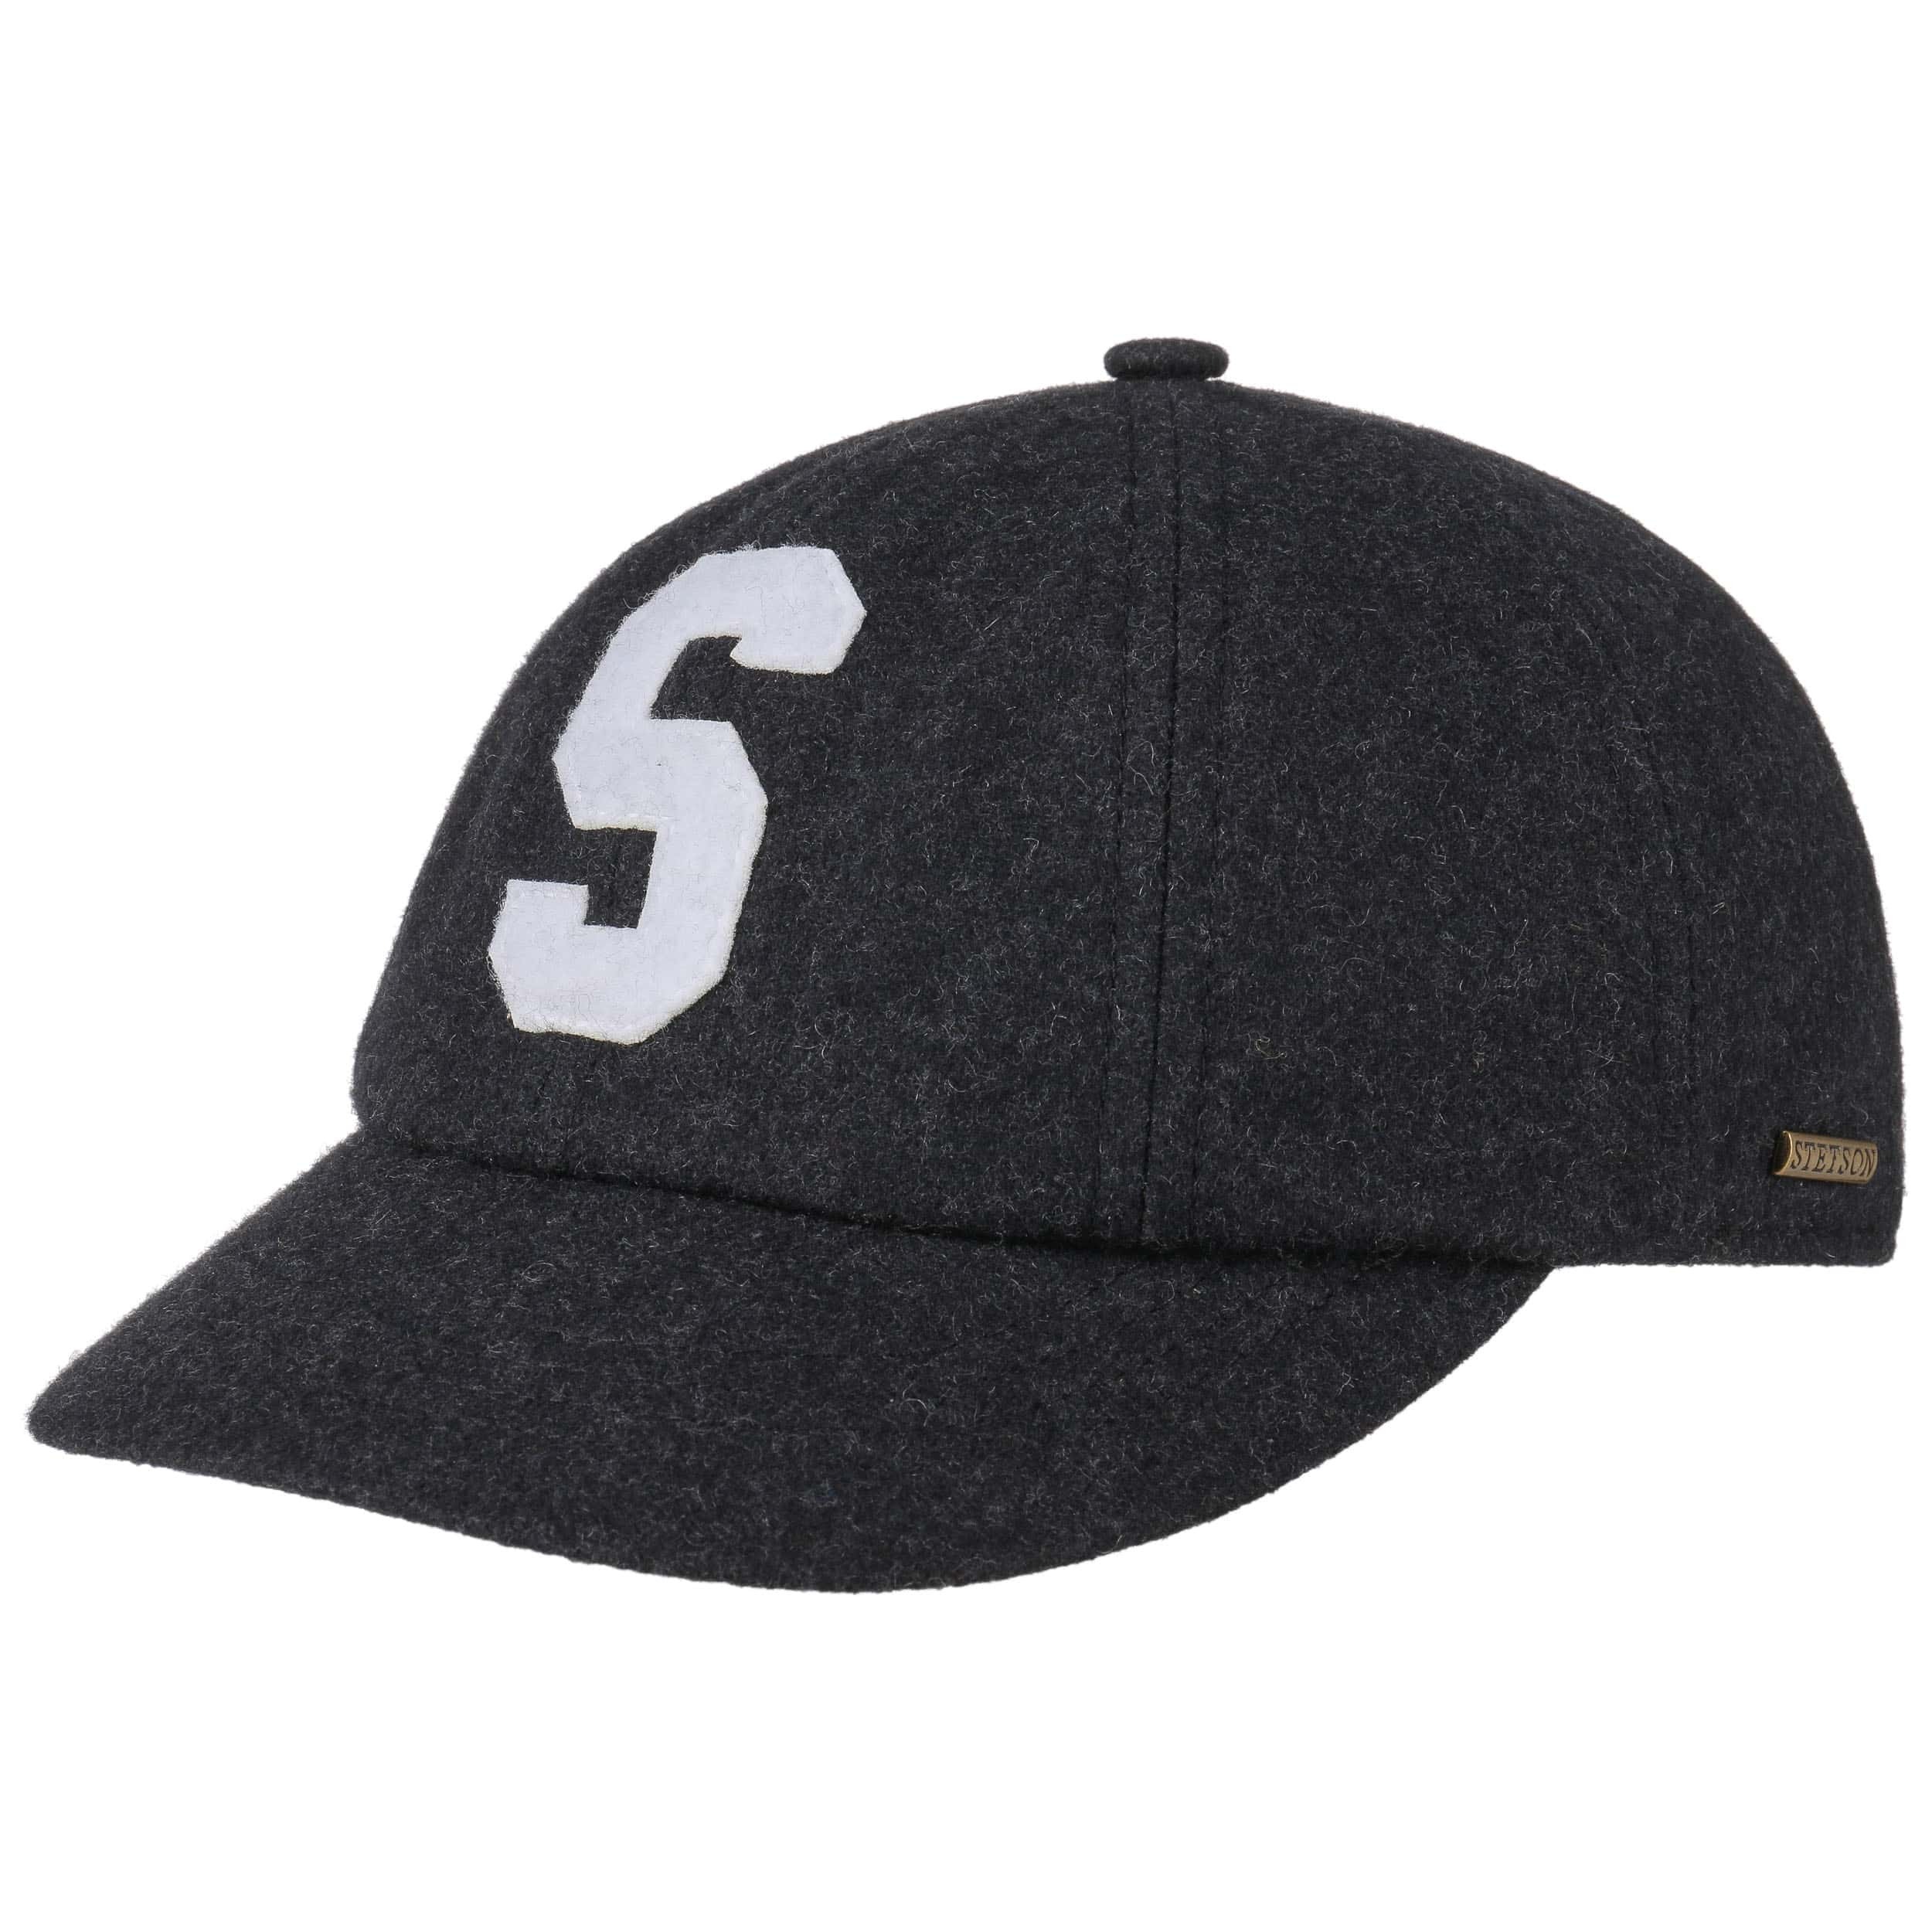 Iconic S Wool Cap by Stetson - 59,00